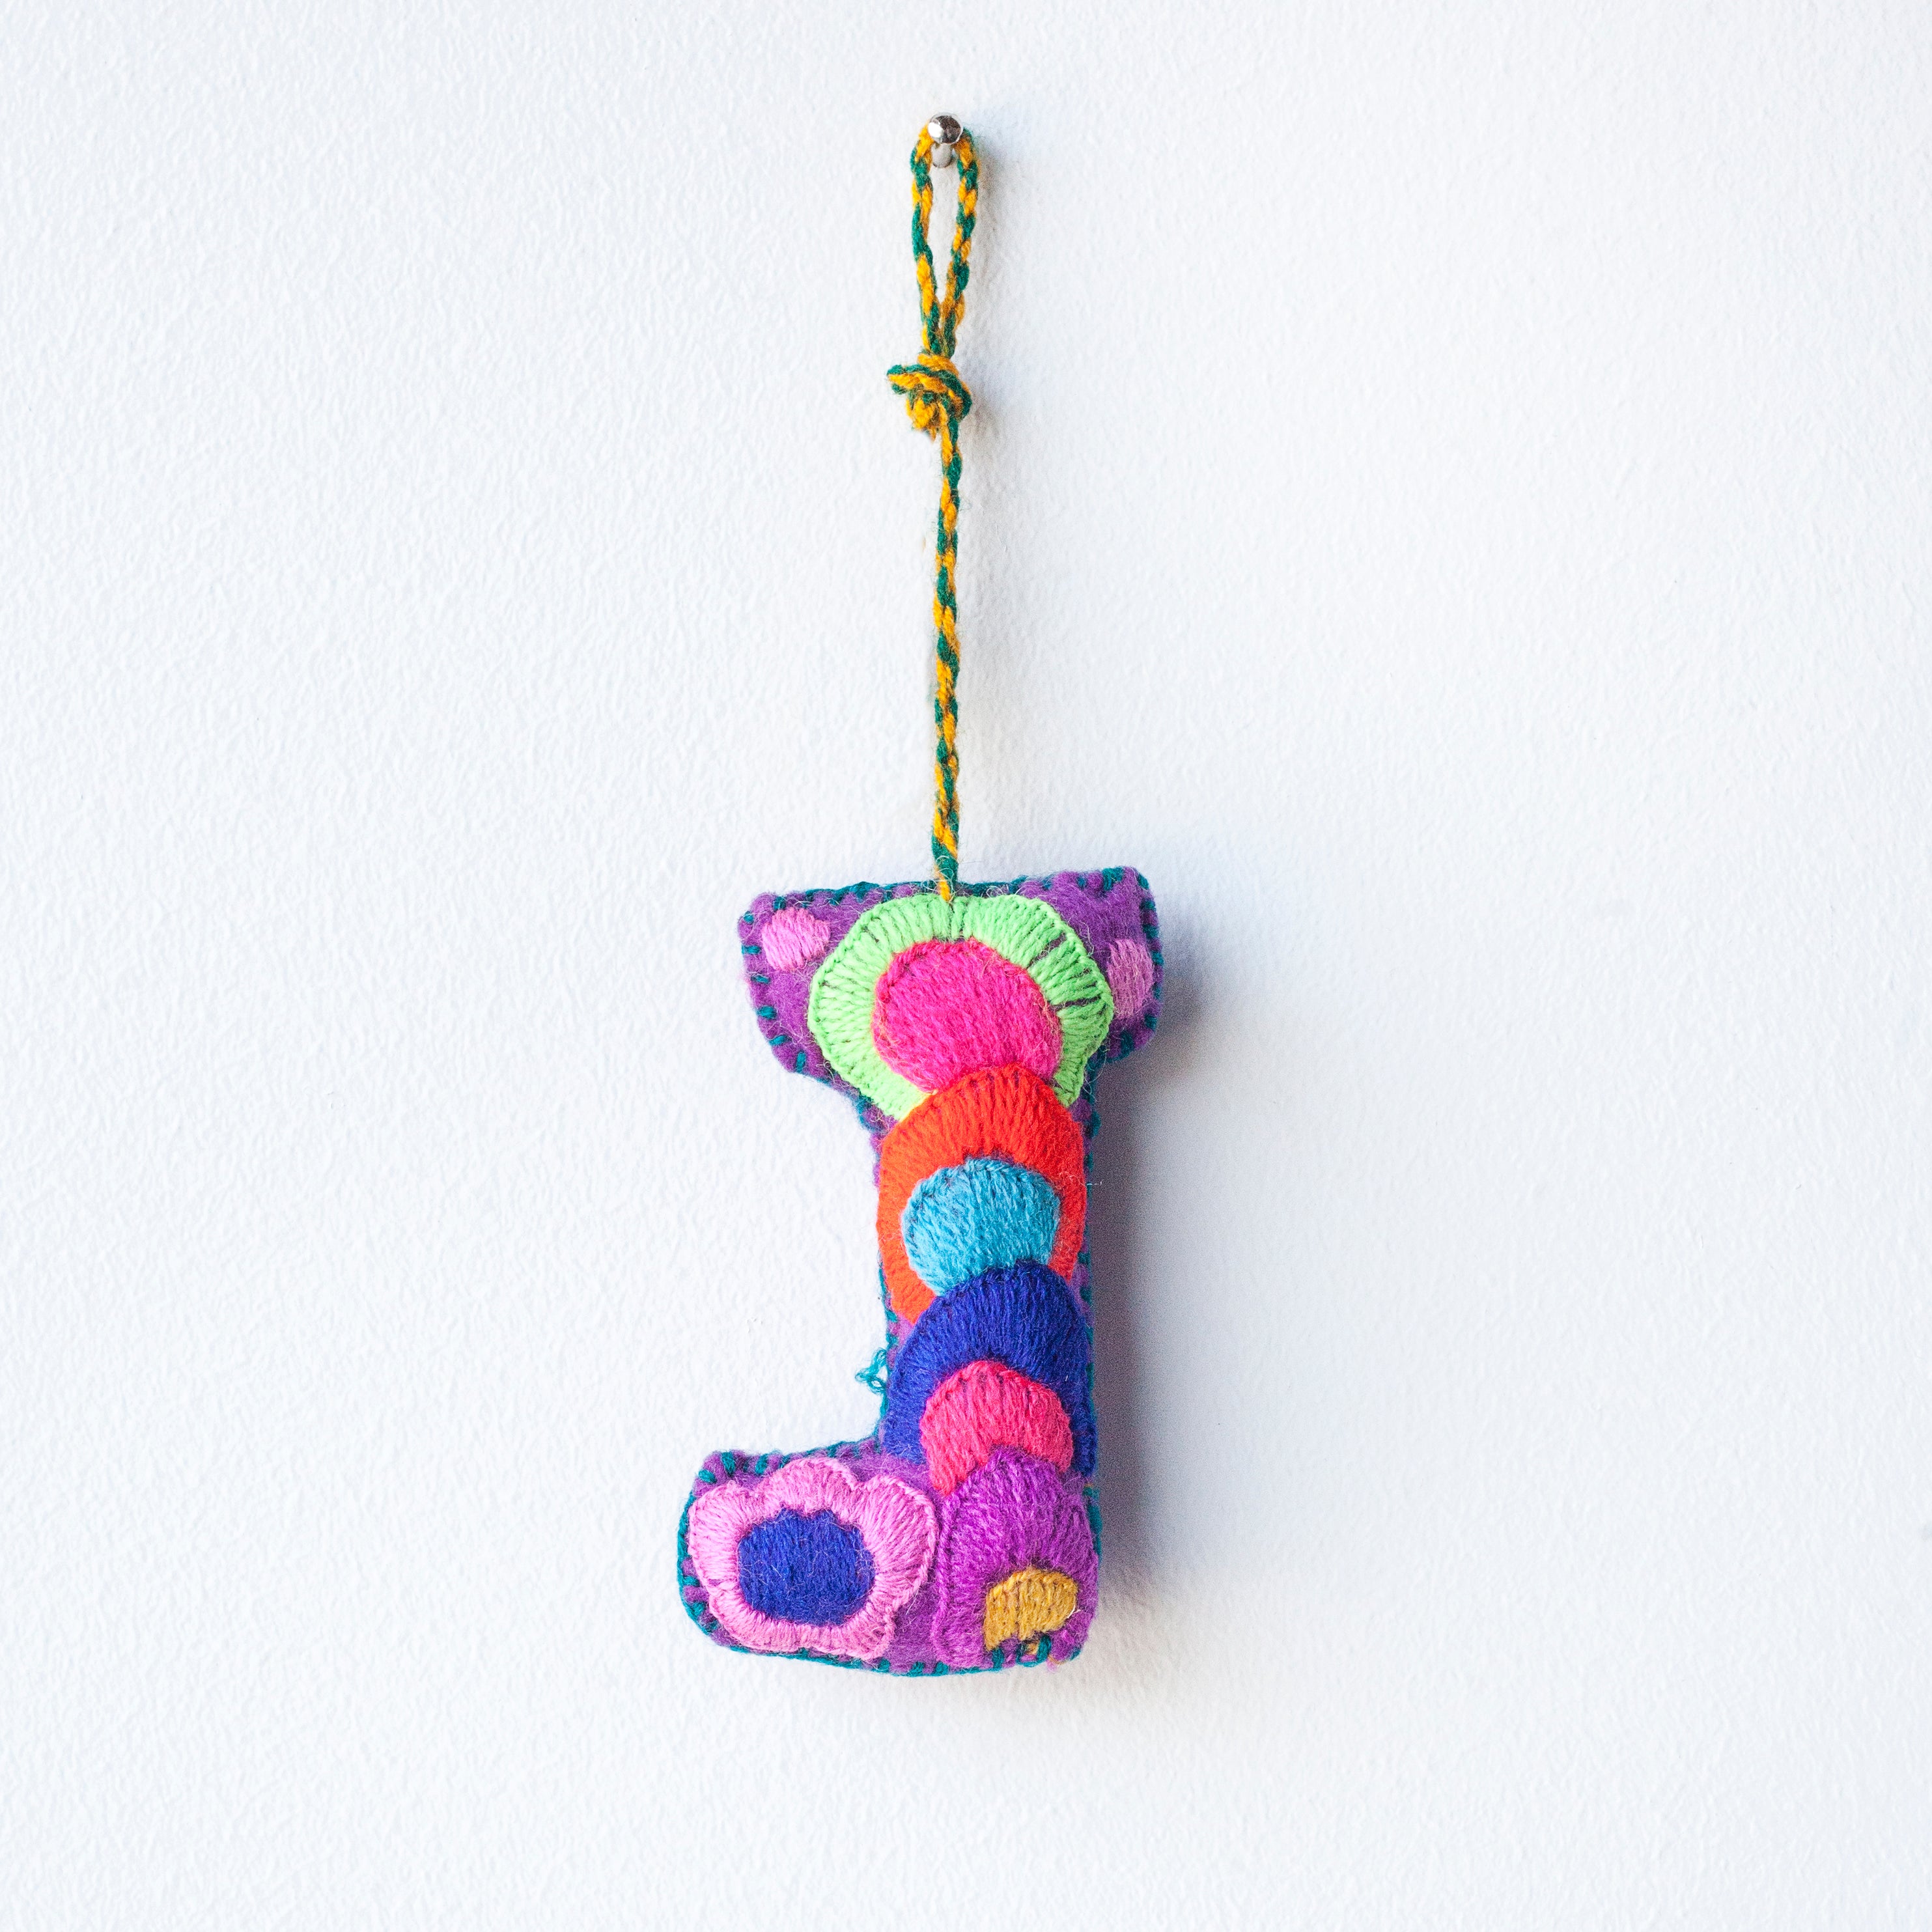 Colorful felt letter "J" with multicolor floral hand-embroidery hanging by a colorful string.